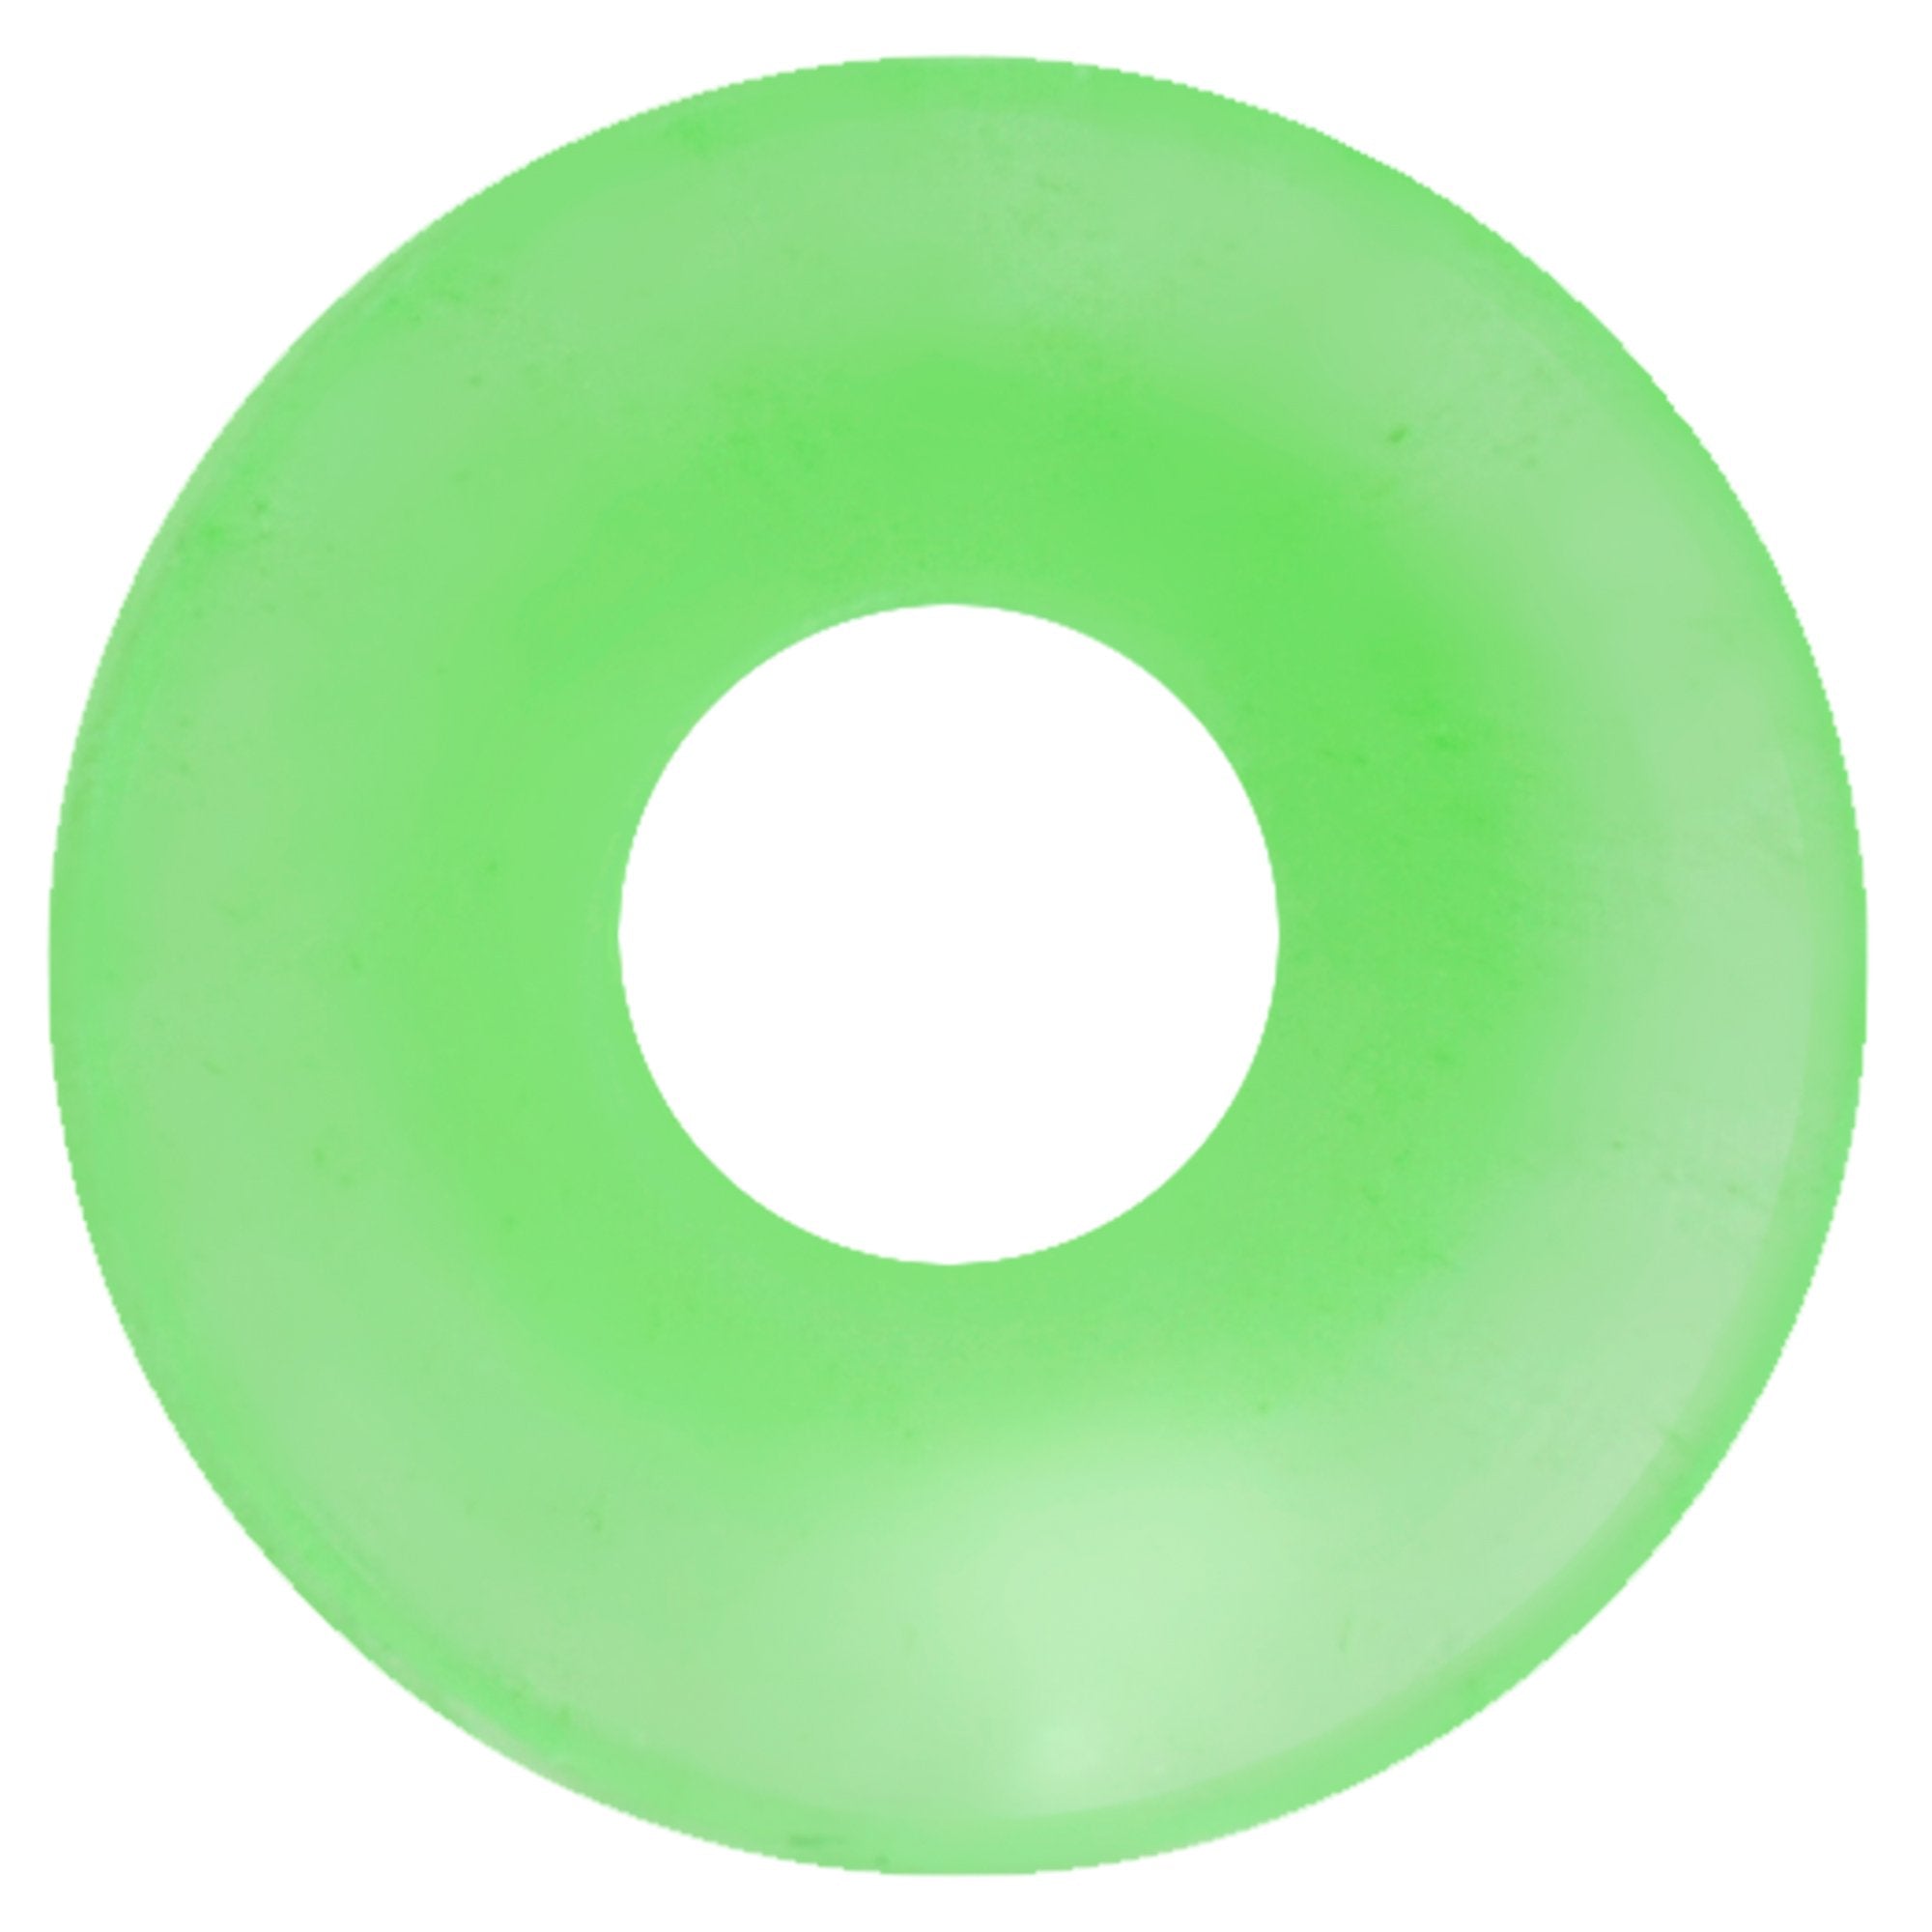 4 Gauge Thin Flexible Green Silicone Double Flare Tunnel Plug Set